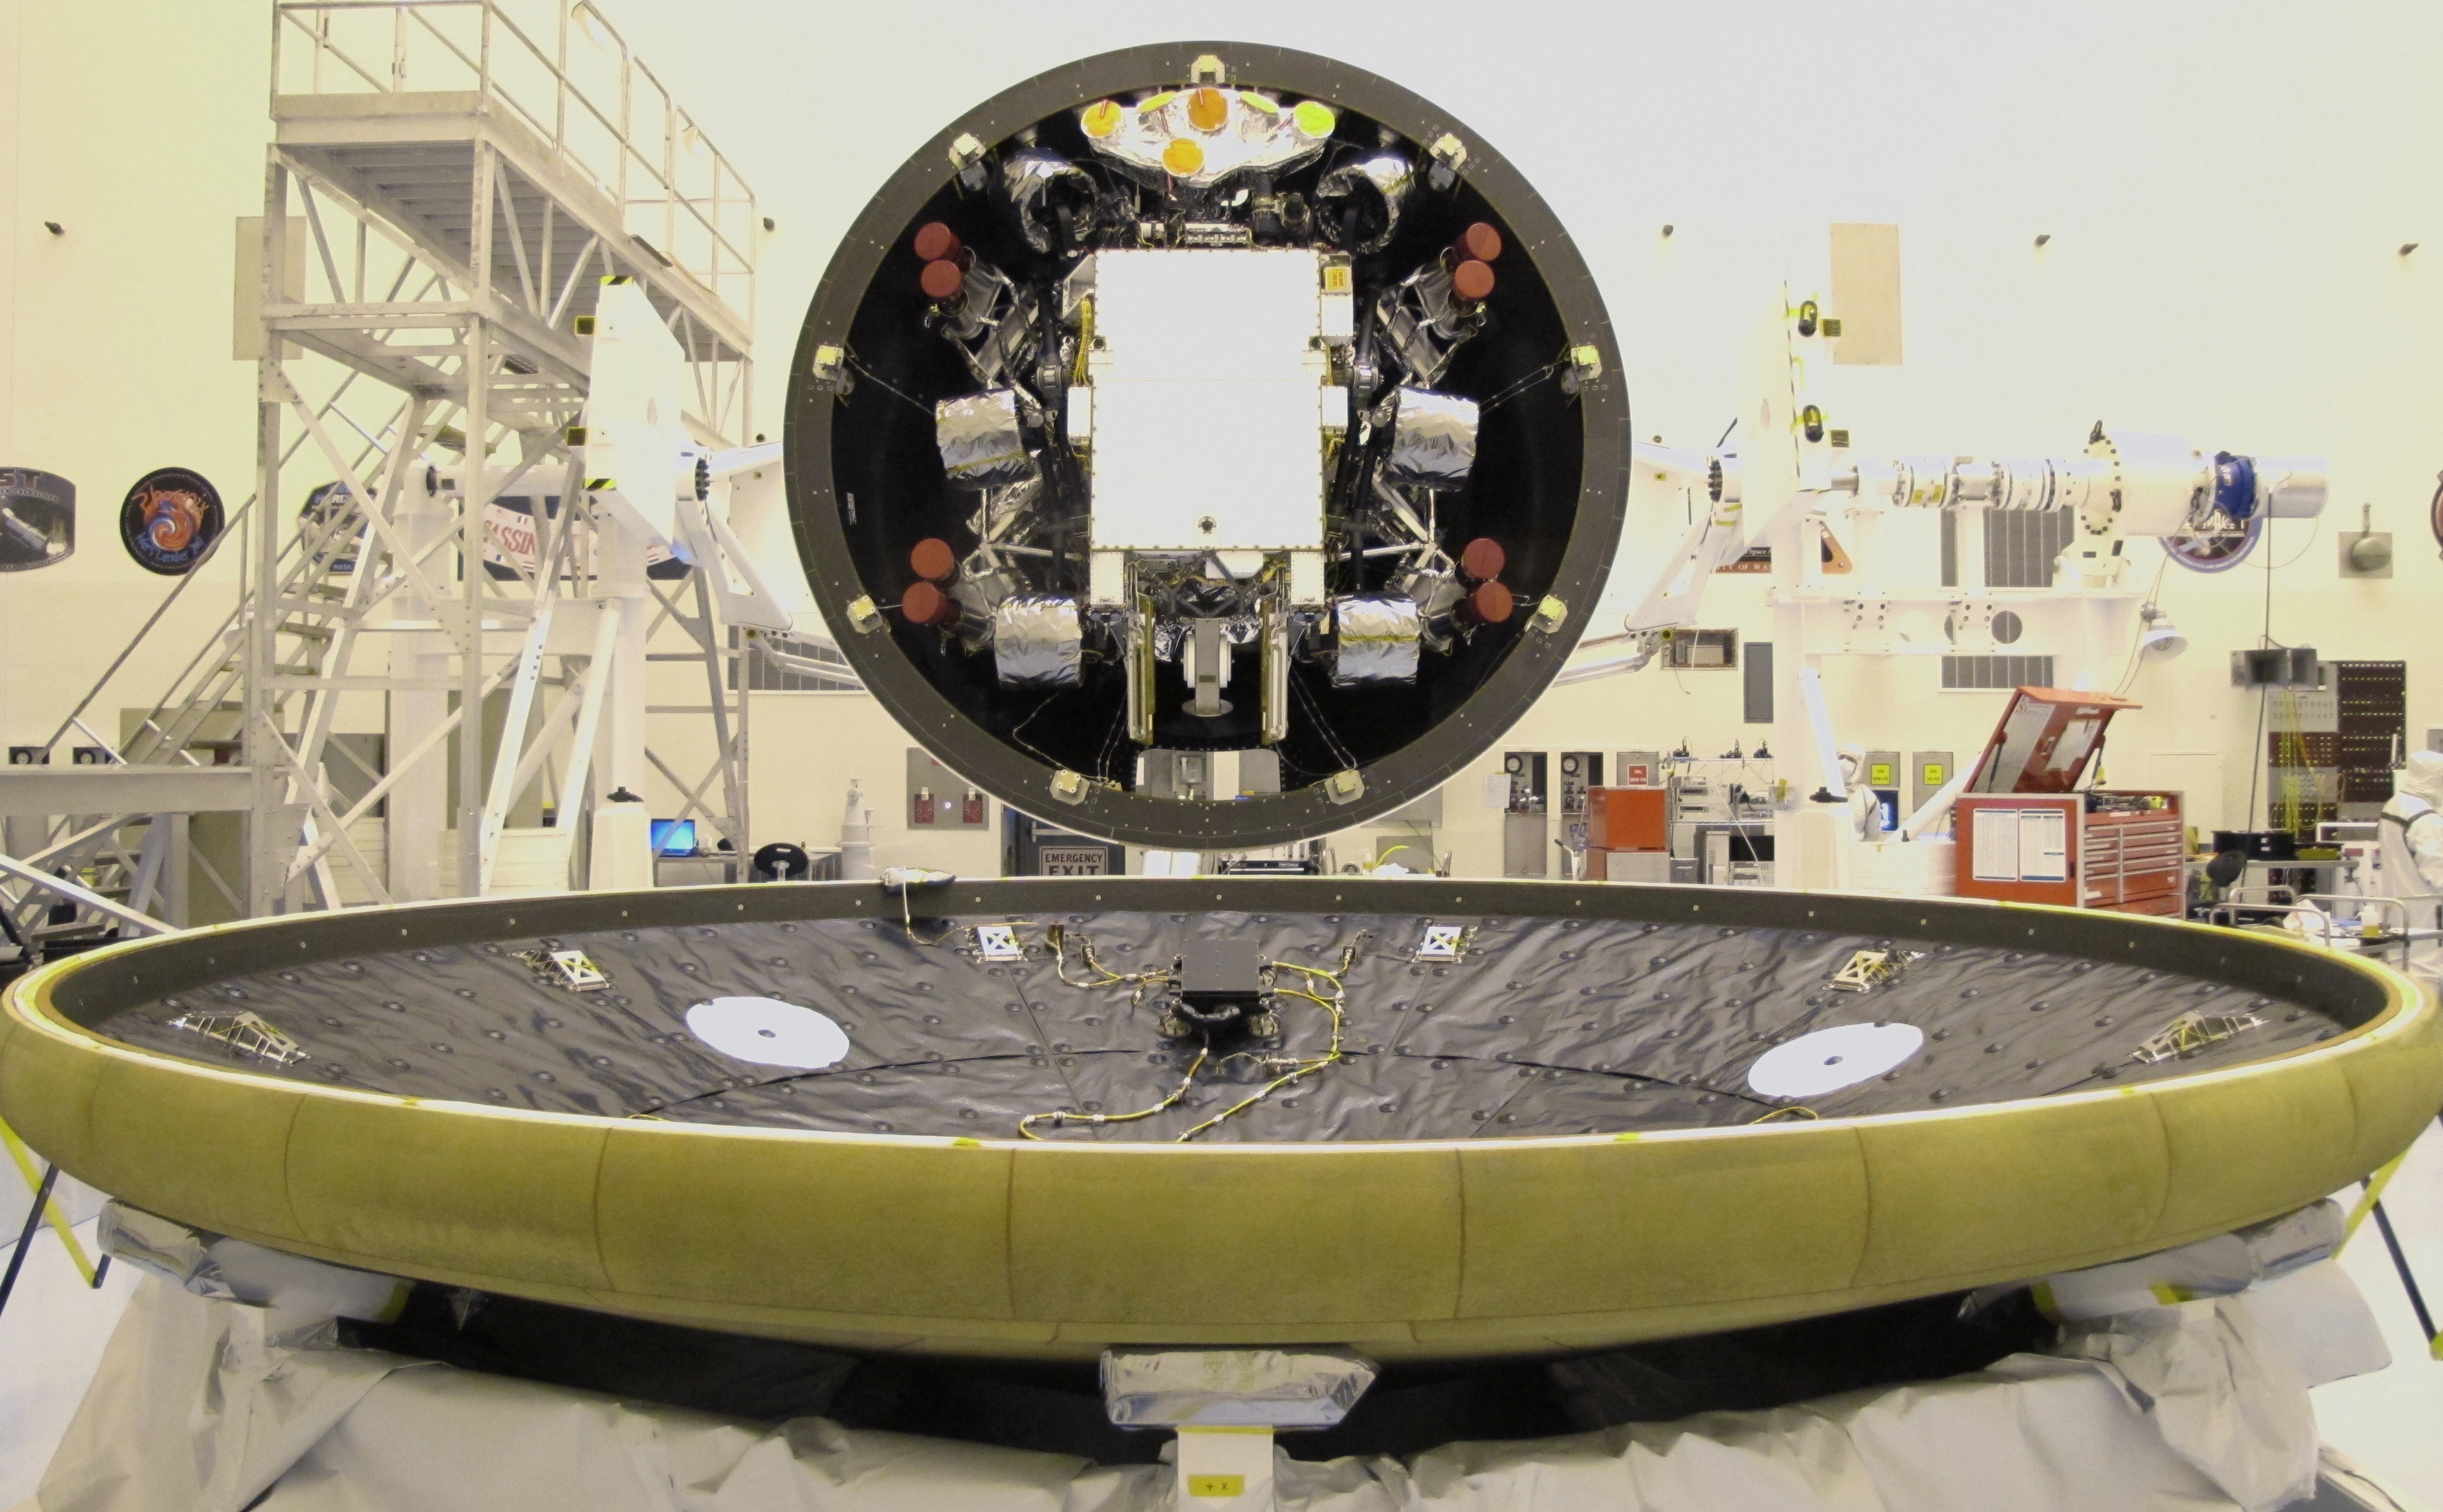 At the Payload Hazardous Servicing Facility at NASA's Kennedy Space Center in Florida, the "back shell powered descent vehicle" configuration, containing NASA's Mars Science Laboratory rover, Curiosity, is being rotated for final closeout actions.